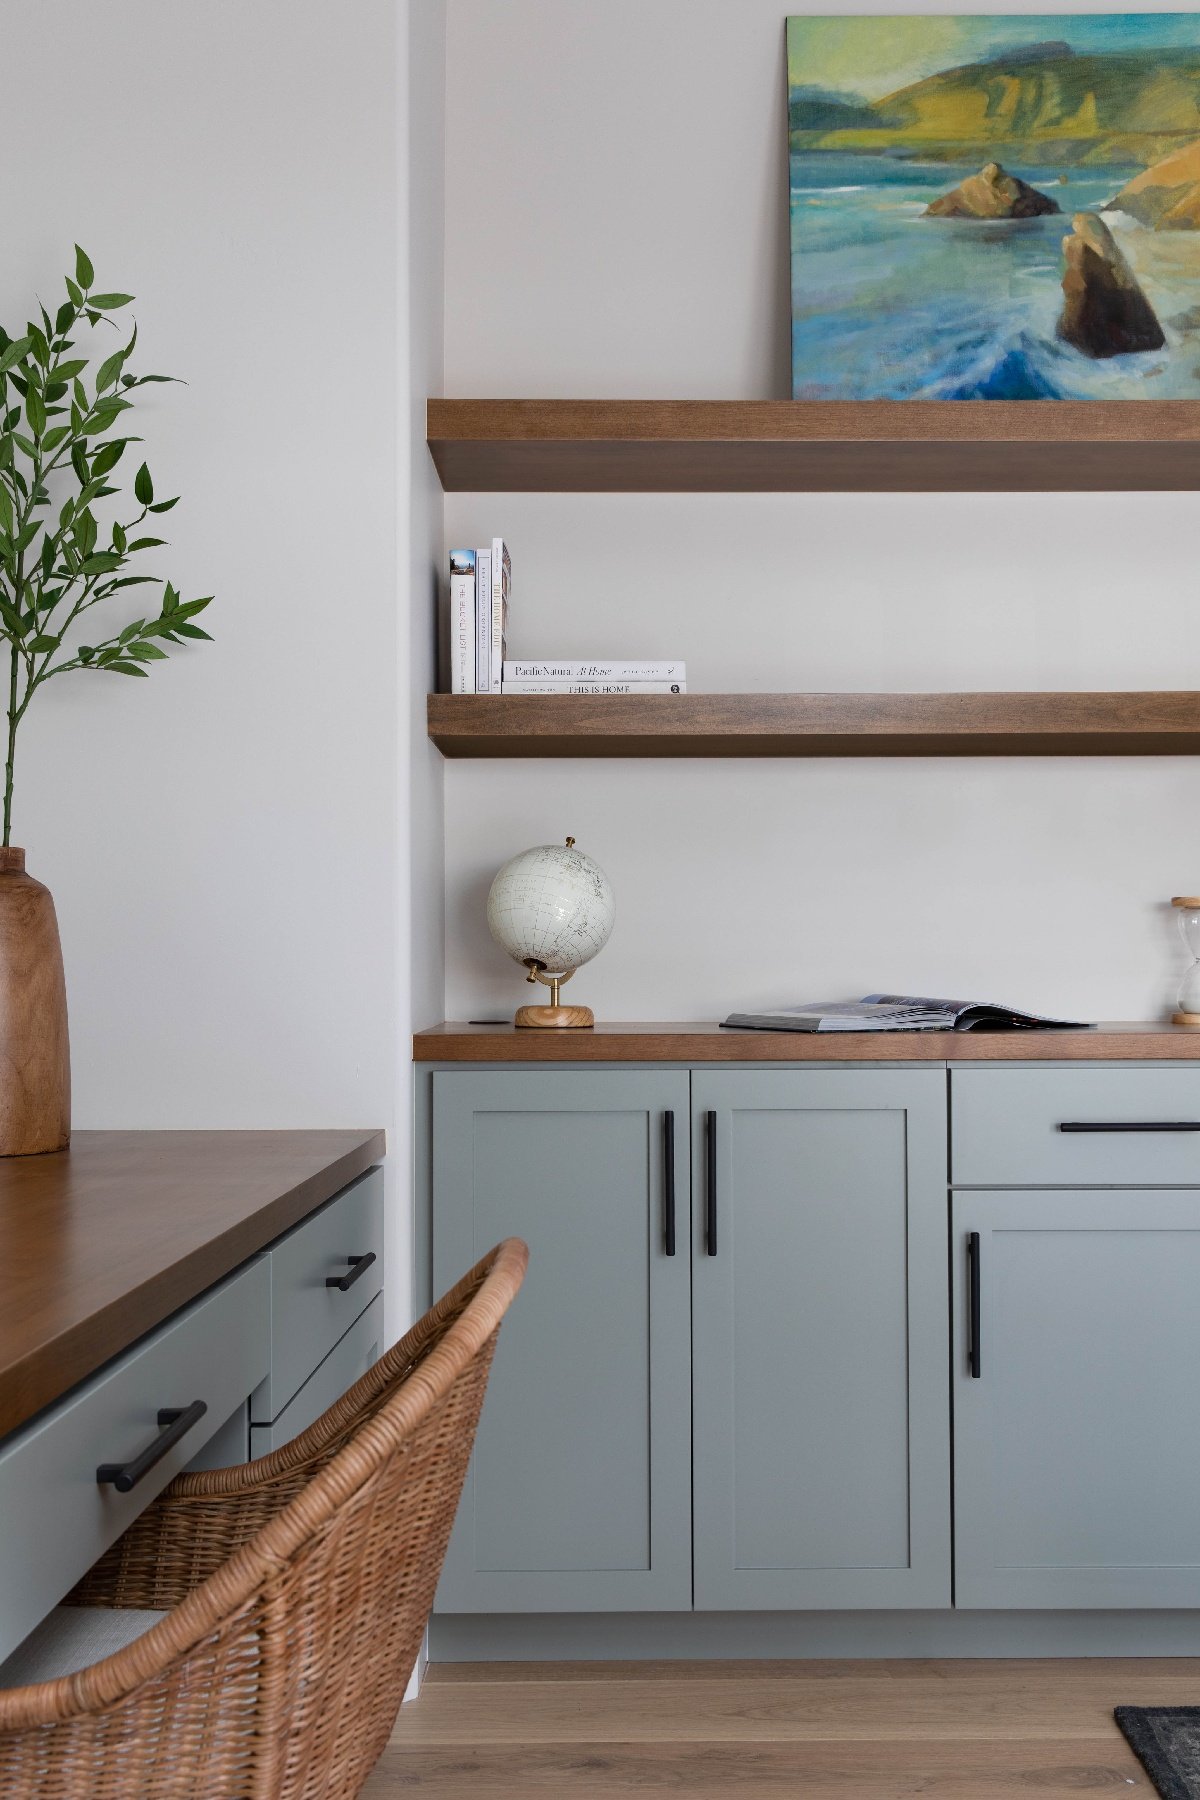 Close up of pastel and pale blue storage cabinets with wooden floating shelves wall mounted above.